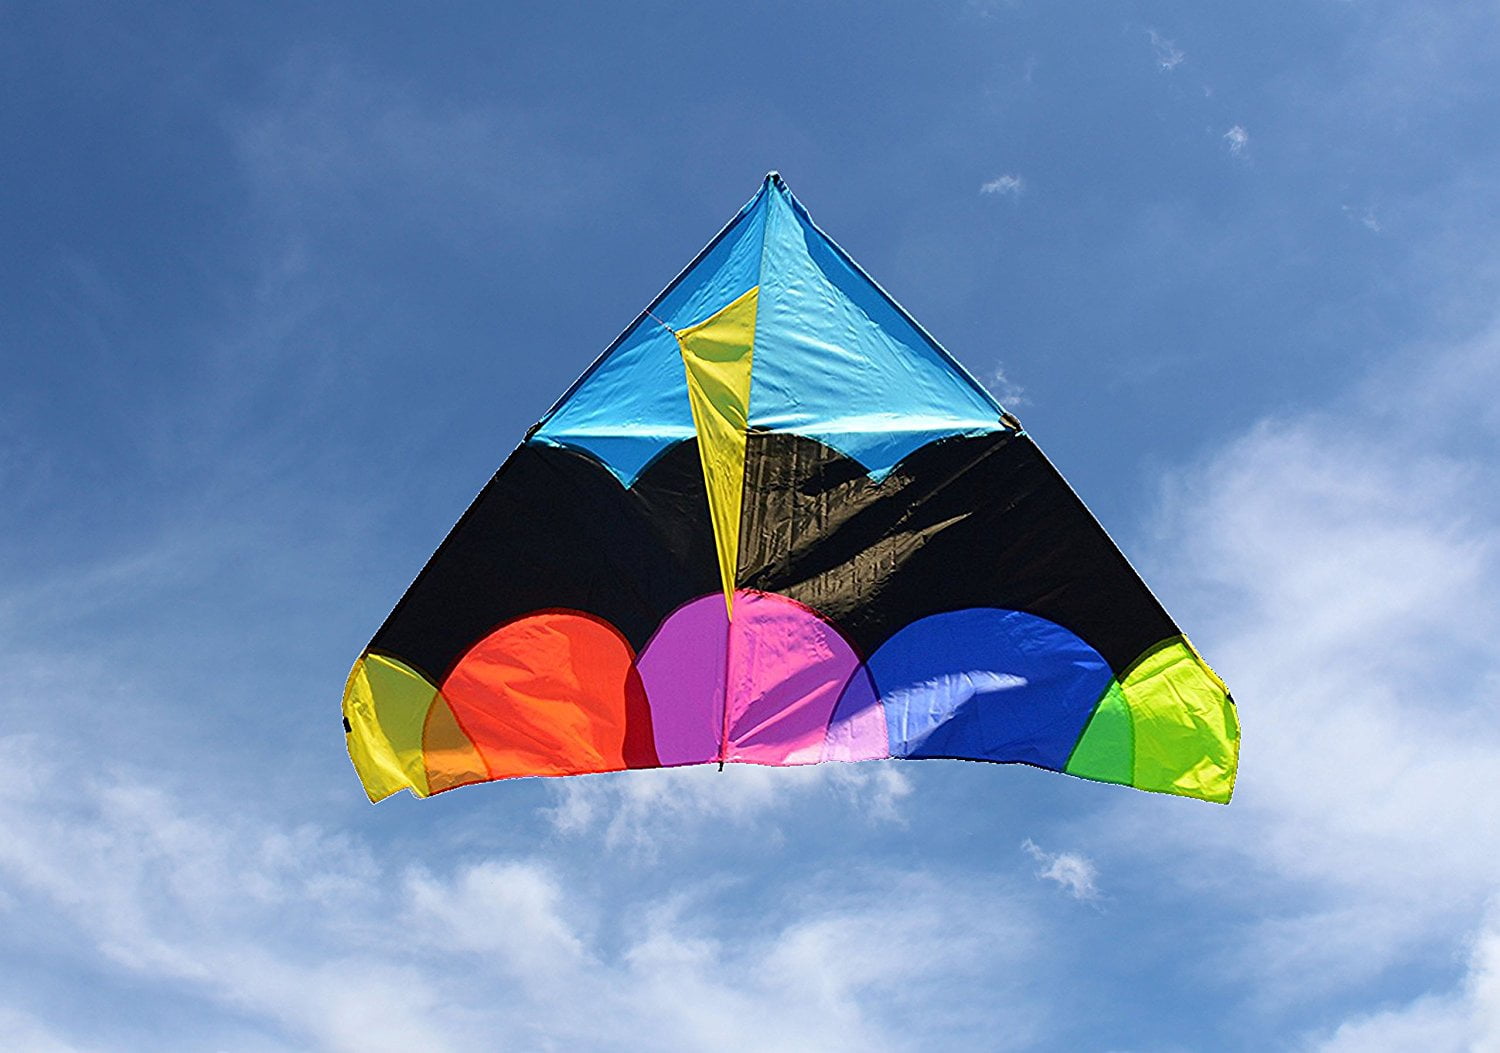 Weifang Sky Kites Giant Delta Ring Ikite Shape Premium Large Kite Line Handle for sale online 